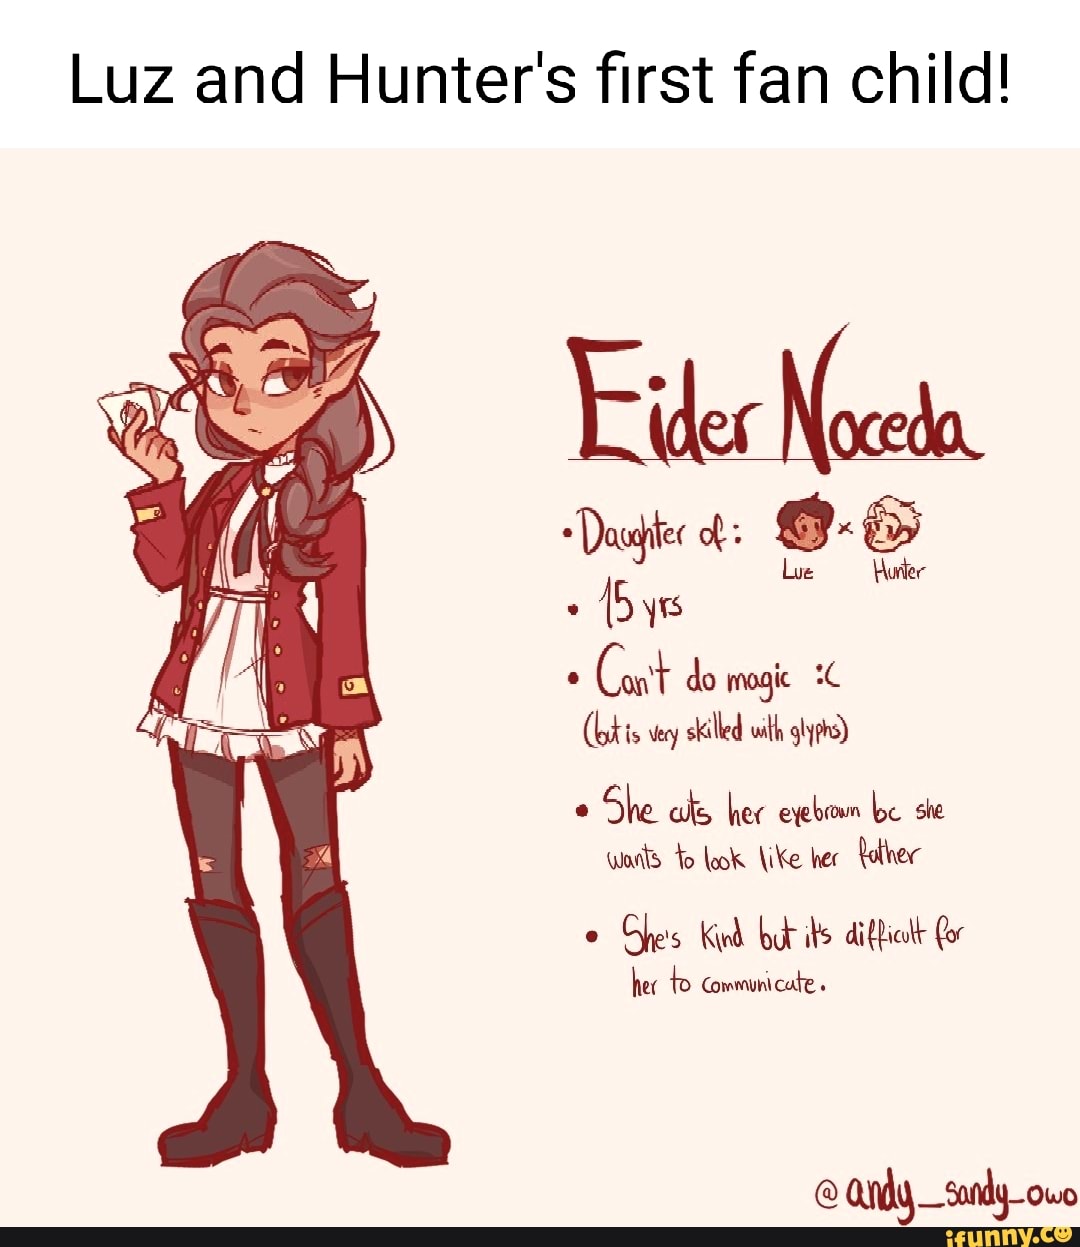 luz-and-hunter-s-first-fan-child-eider-noceda-drastie-t-cont-do-magic-likis-very-skilled-vith